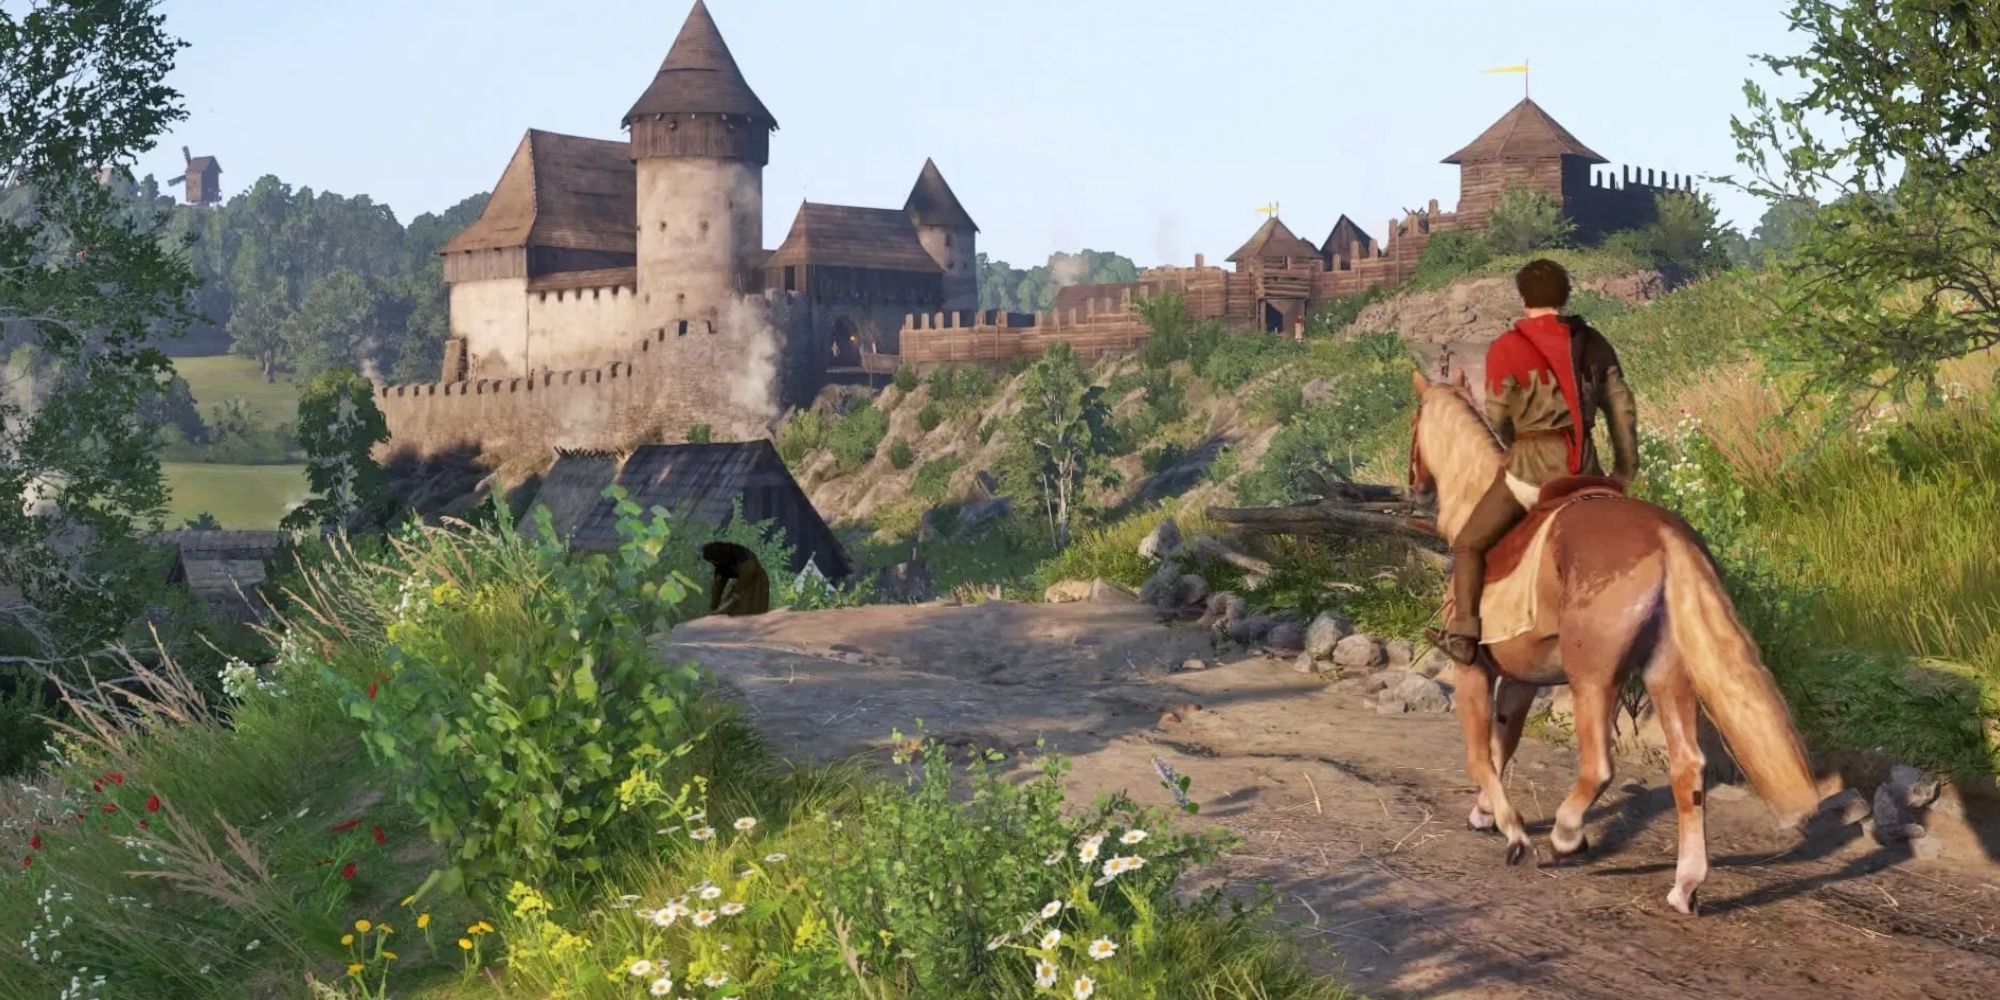 Approaching a fort town in Kingdom Come Deliverance